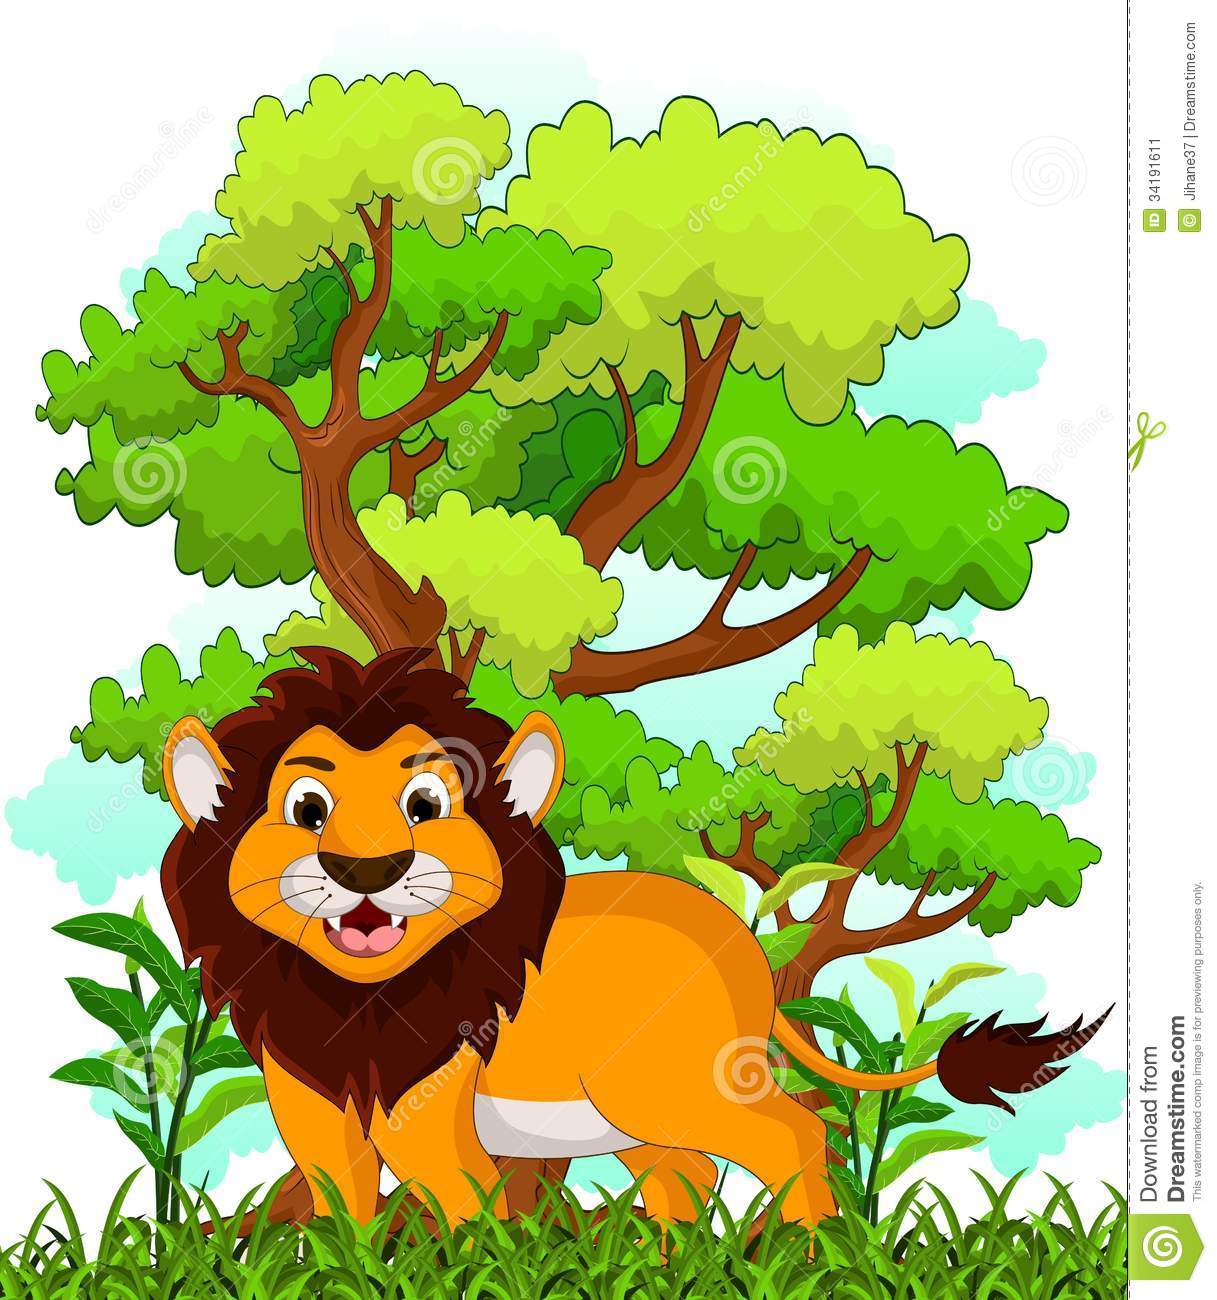 Lion Cartoon With Forest Background Stock Image   Image  34191611